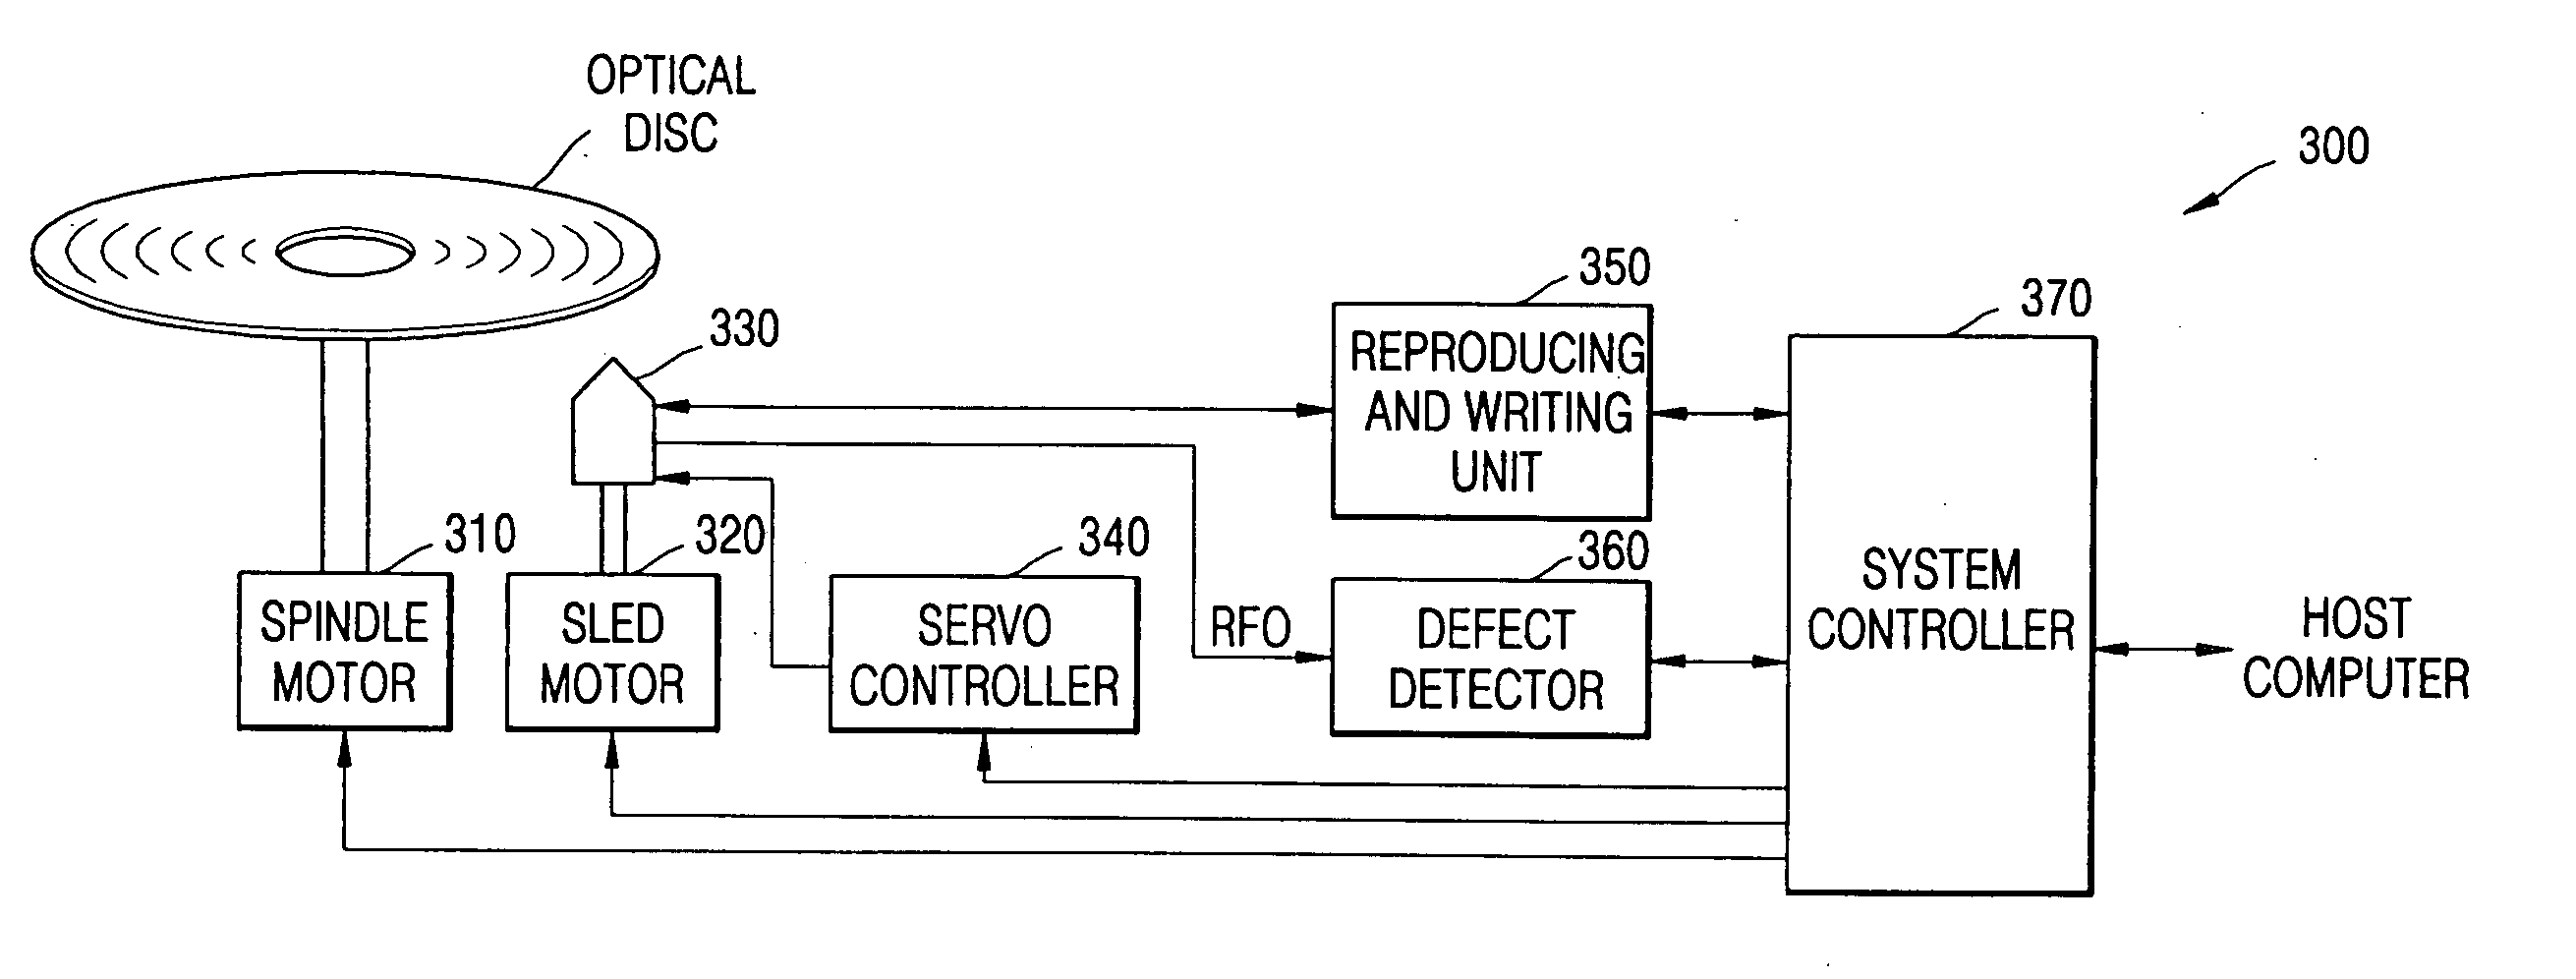 Defect management in disc reproducing/rewriting system